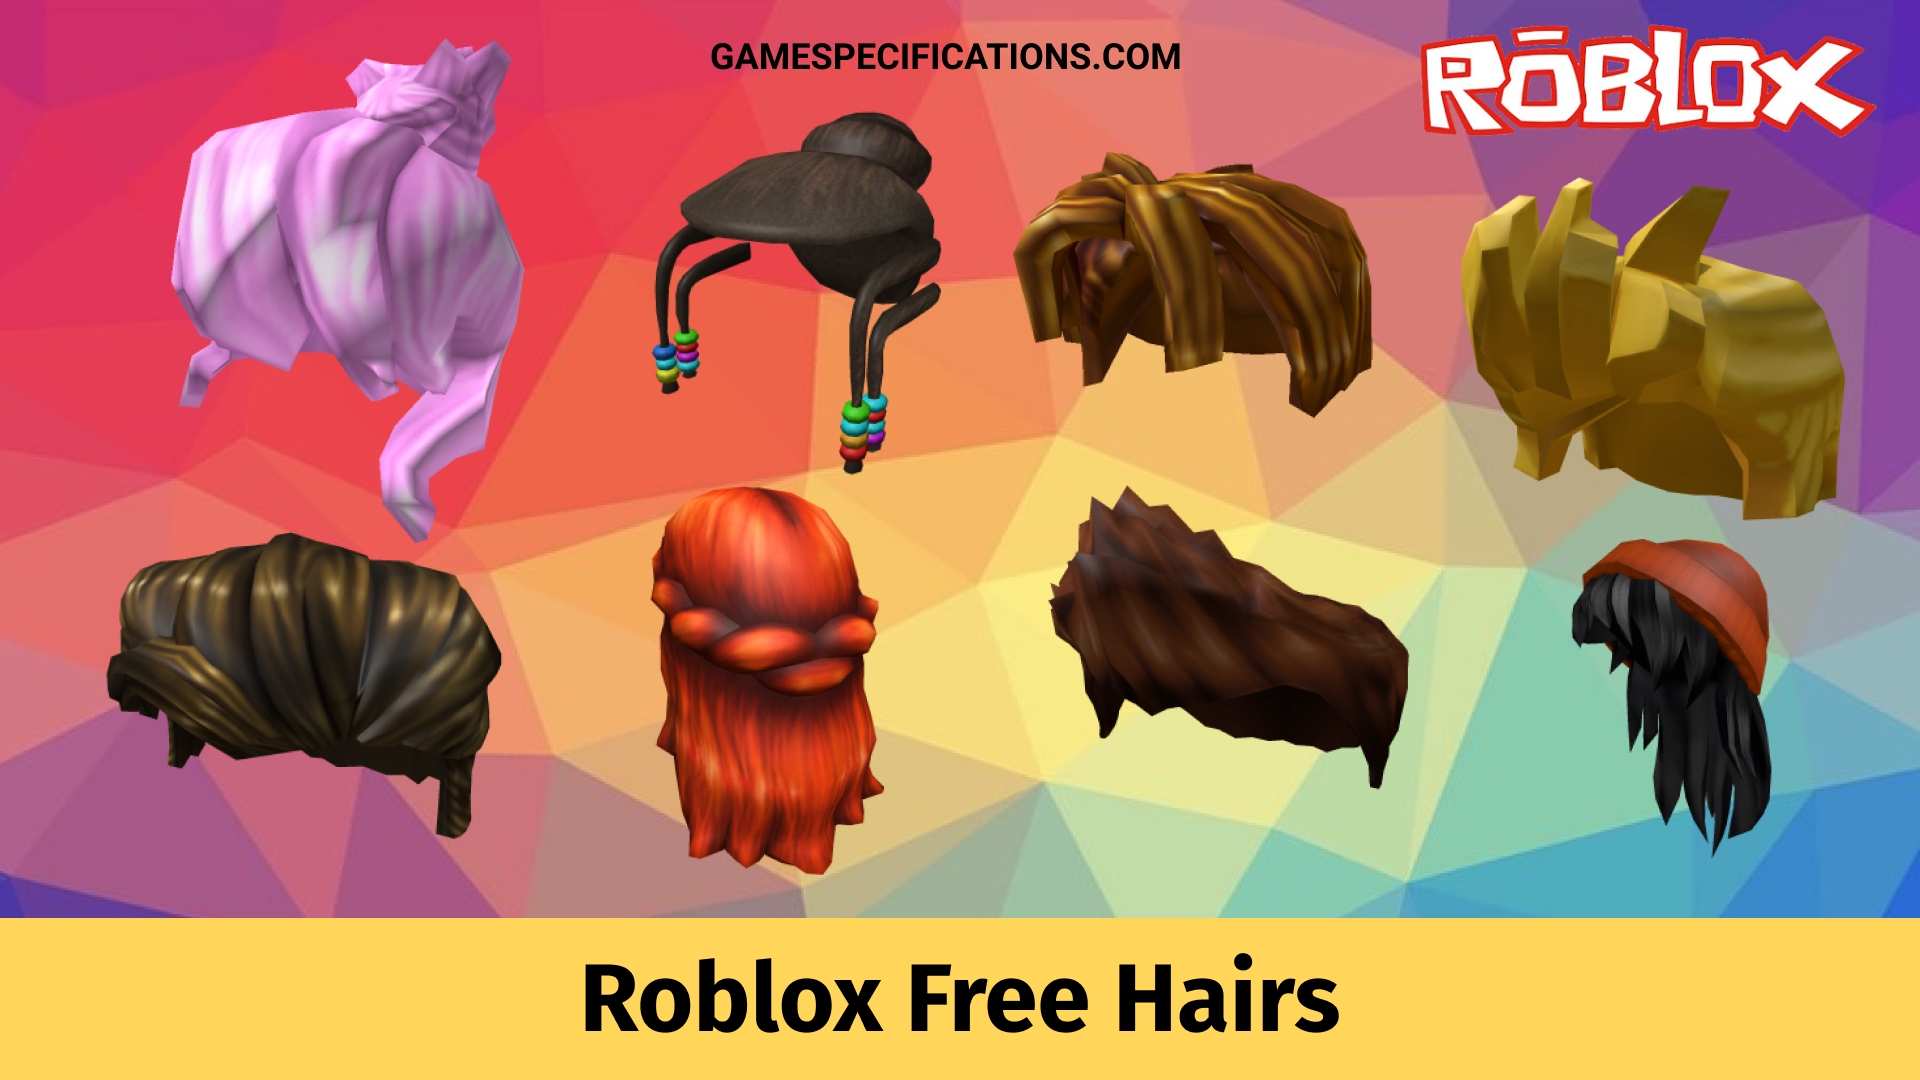 Roblox Free Hairs For Awesome Aesthetics Game Specifications - robux hair